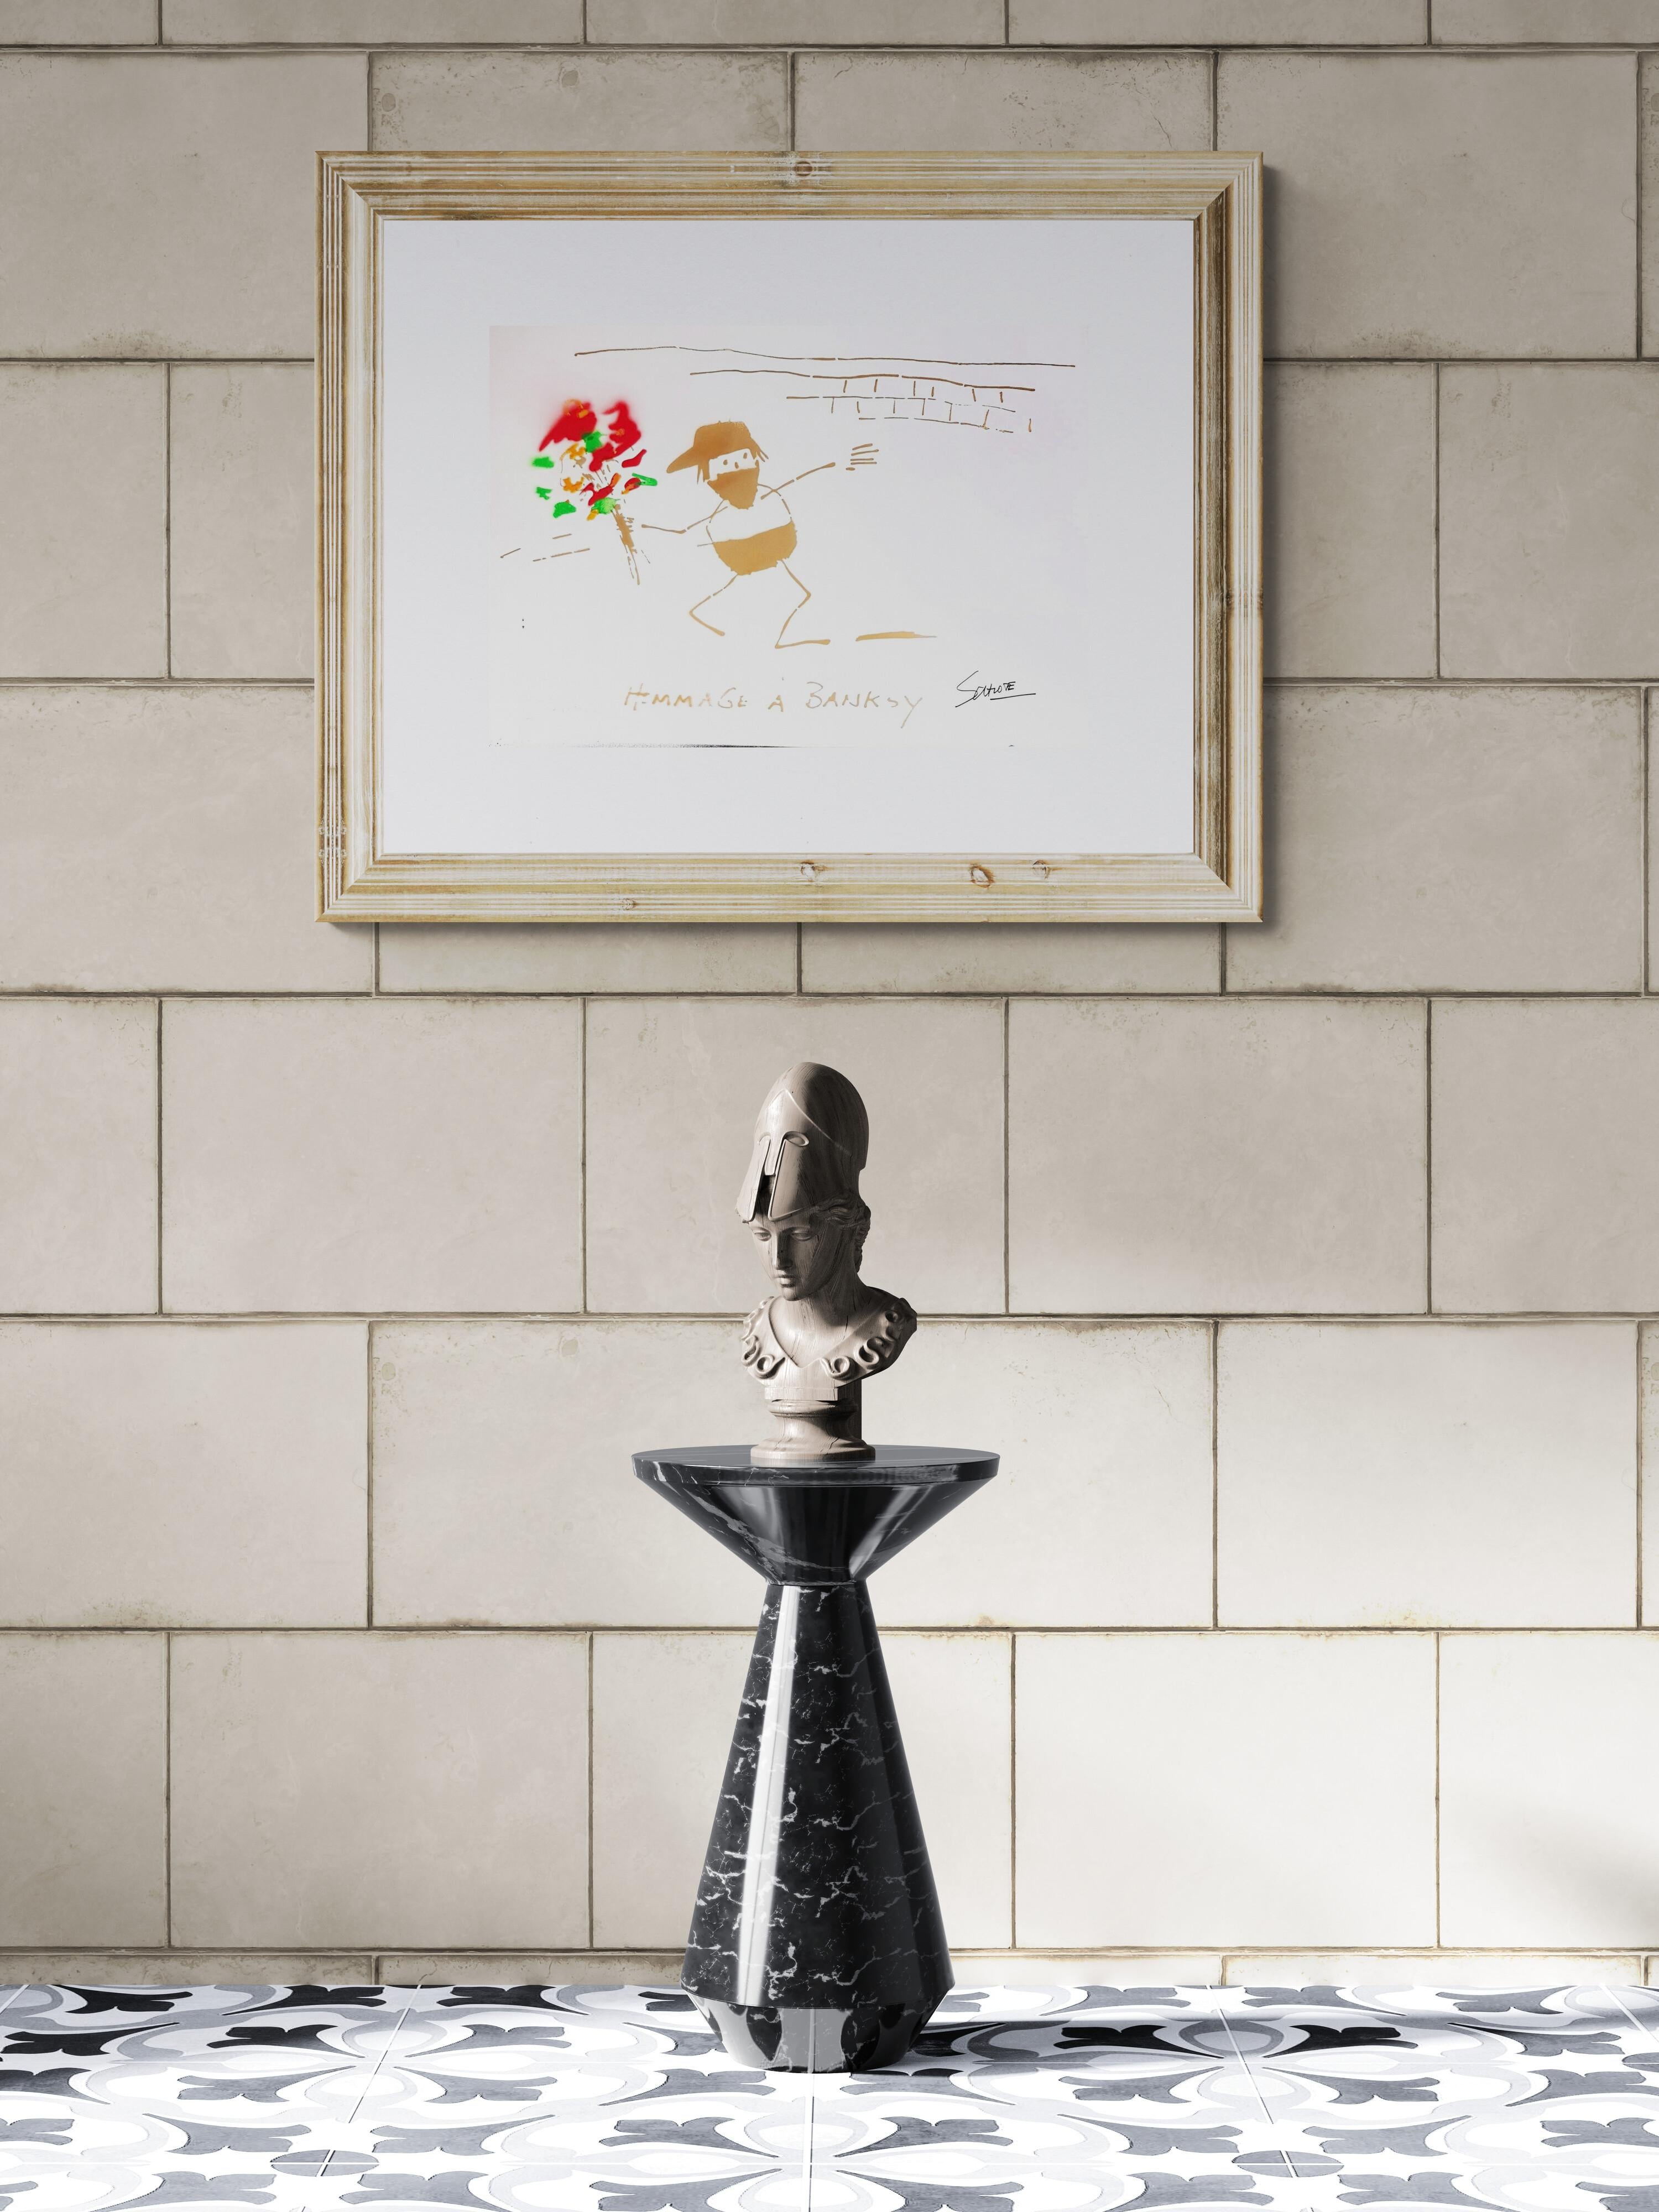 Hommage à Banksy (with orange, red and green Flowers, 30% OFF LIST PRICE) - Print by Wilhelm Schlote